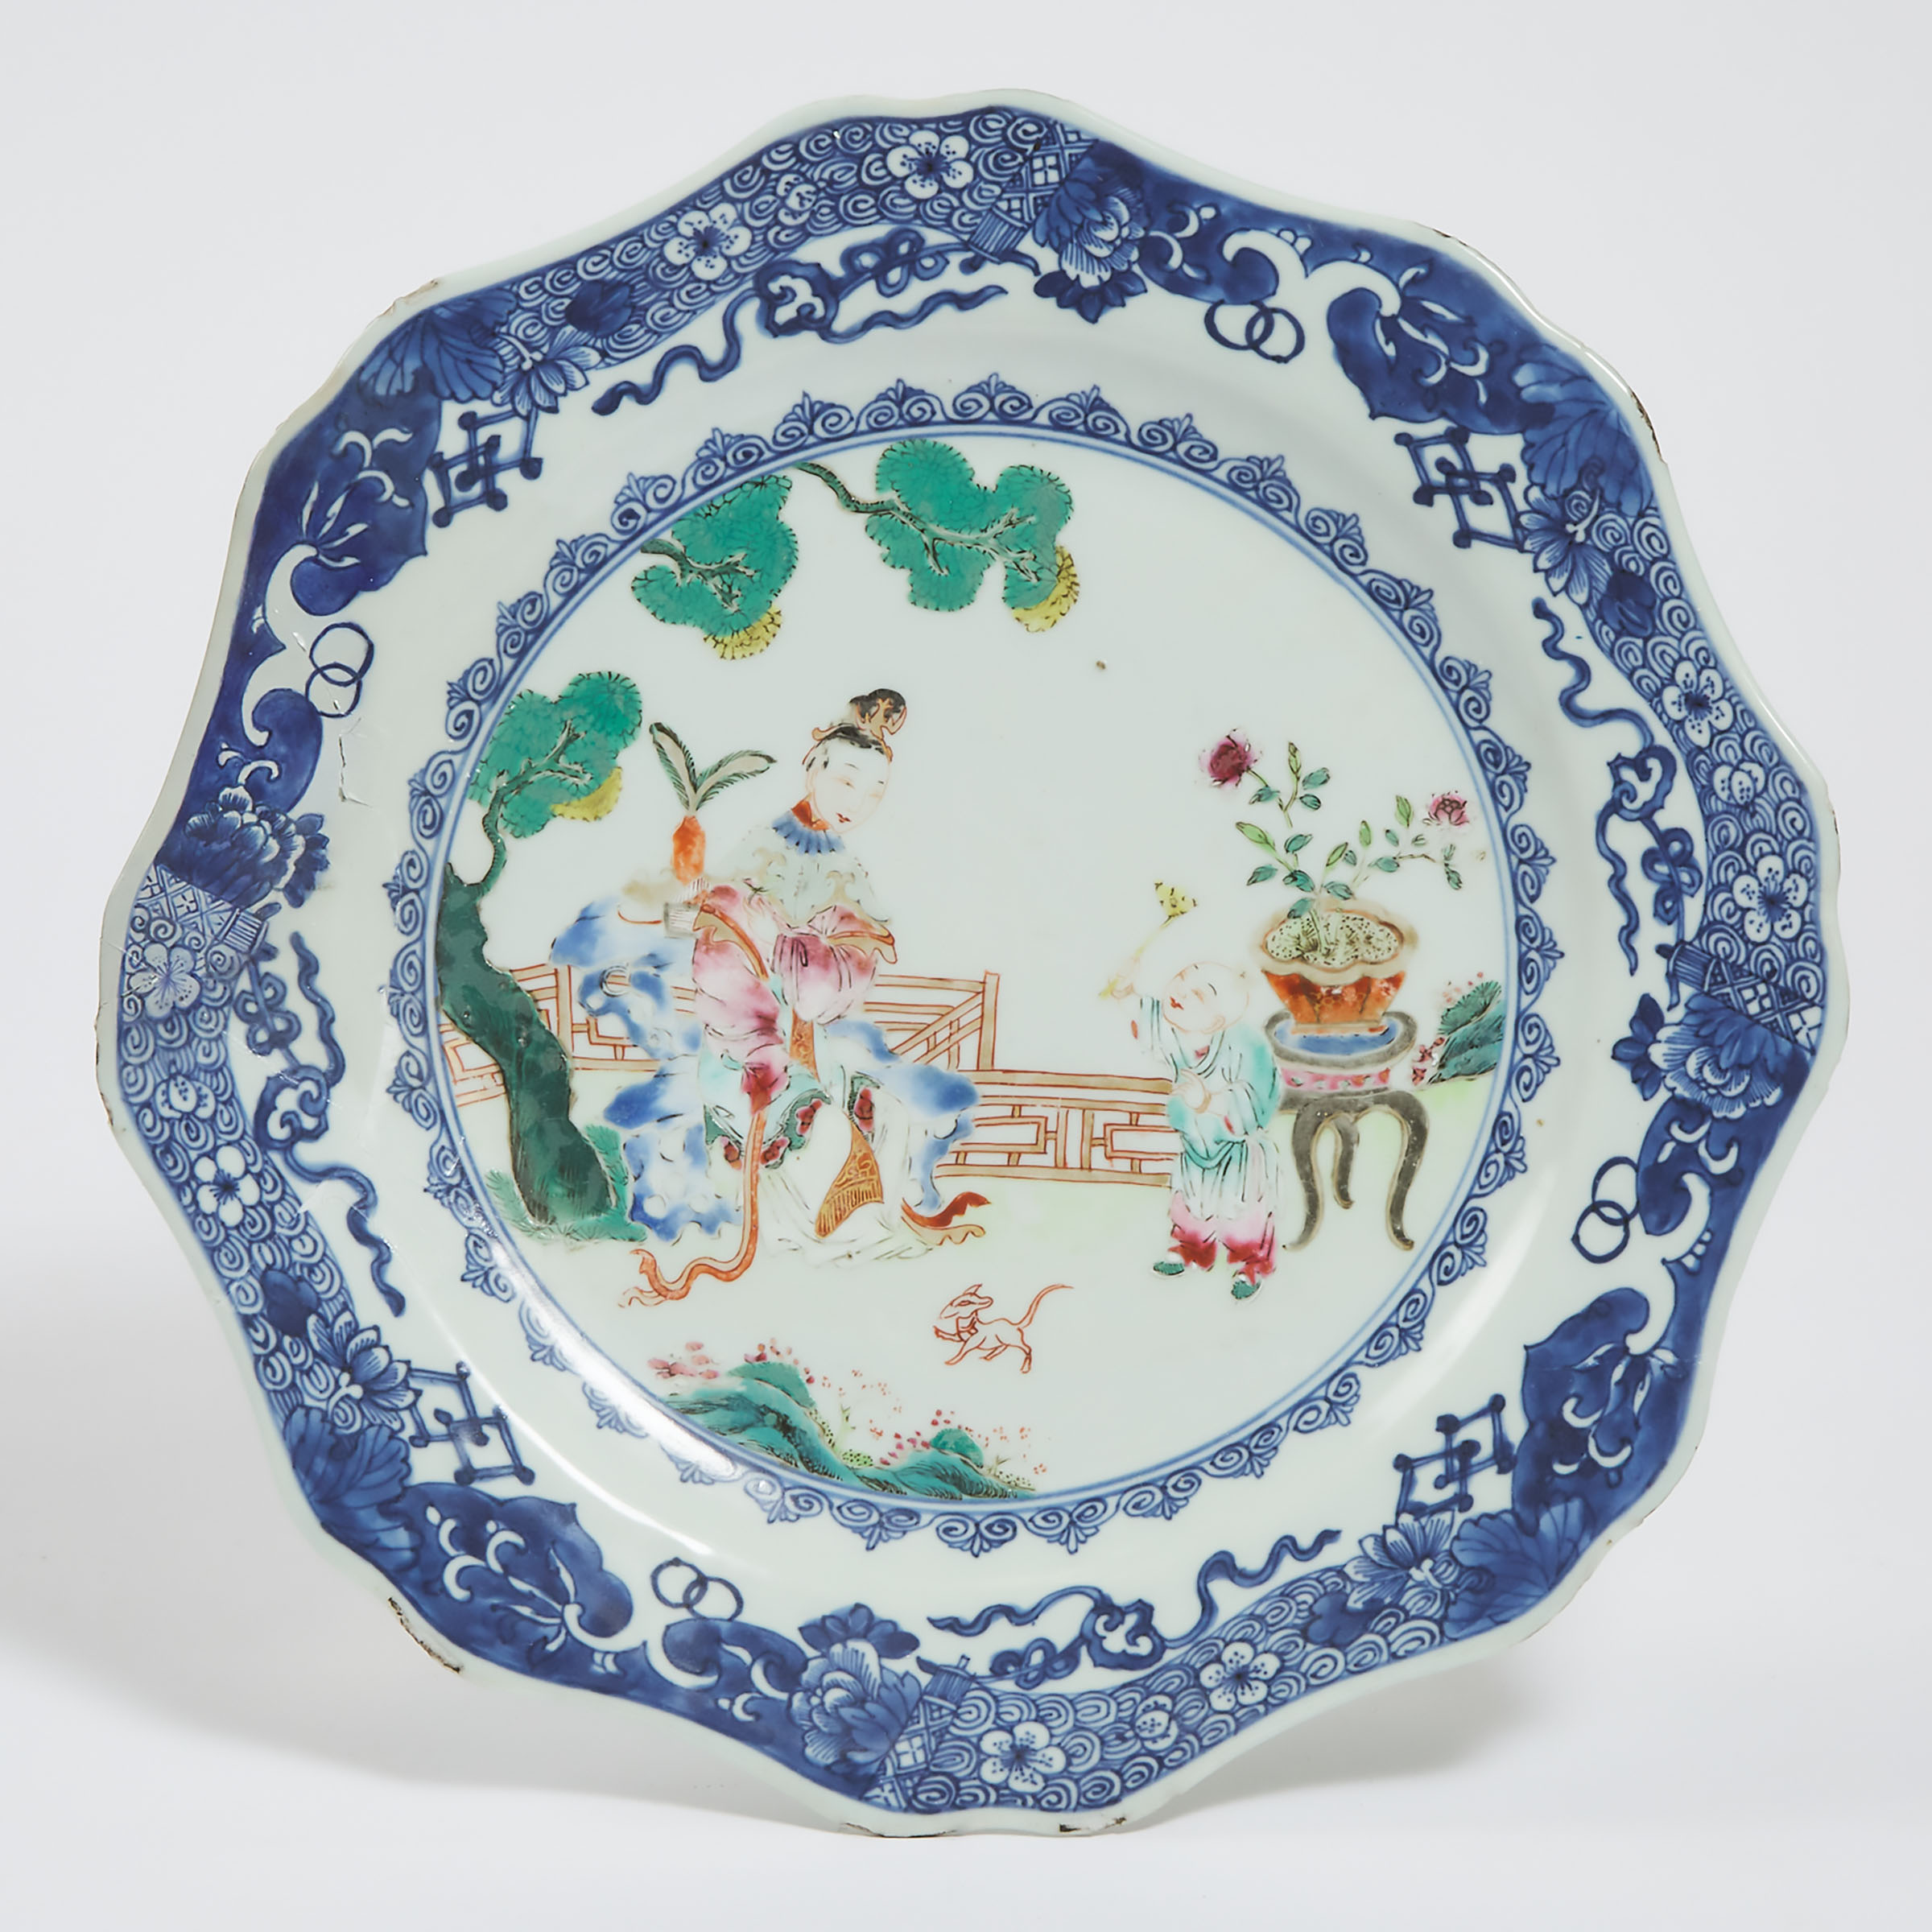 A Chinese Export Blue and White Famille Rose Plate, Late 18th Century